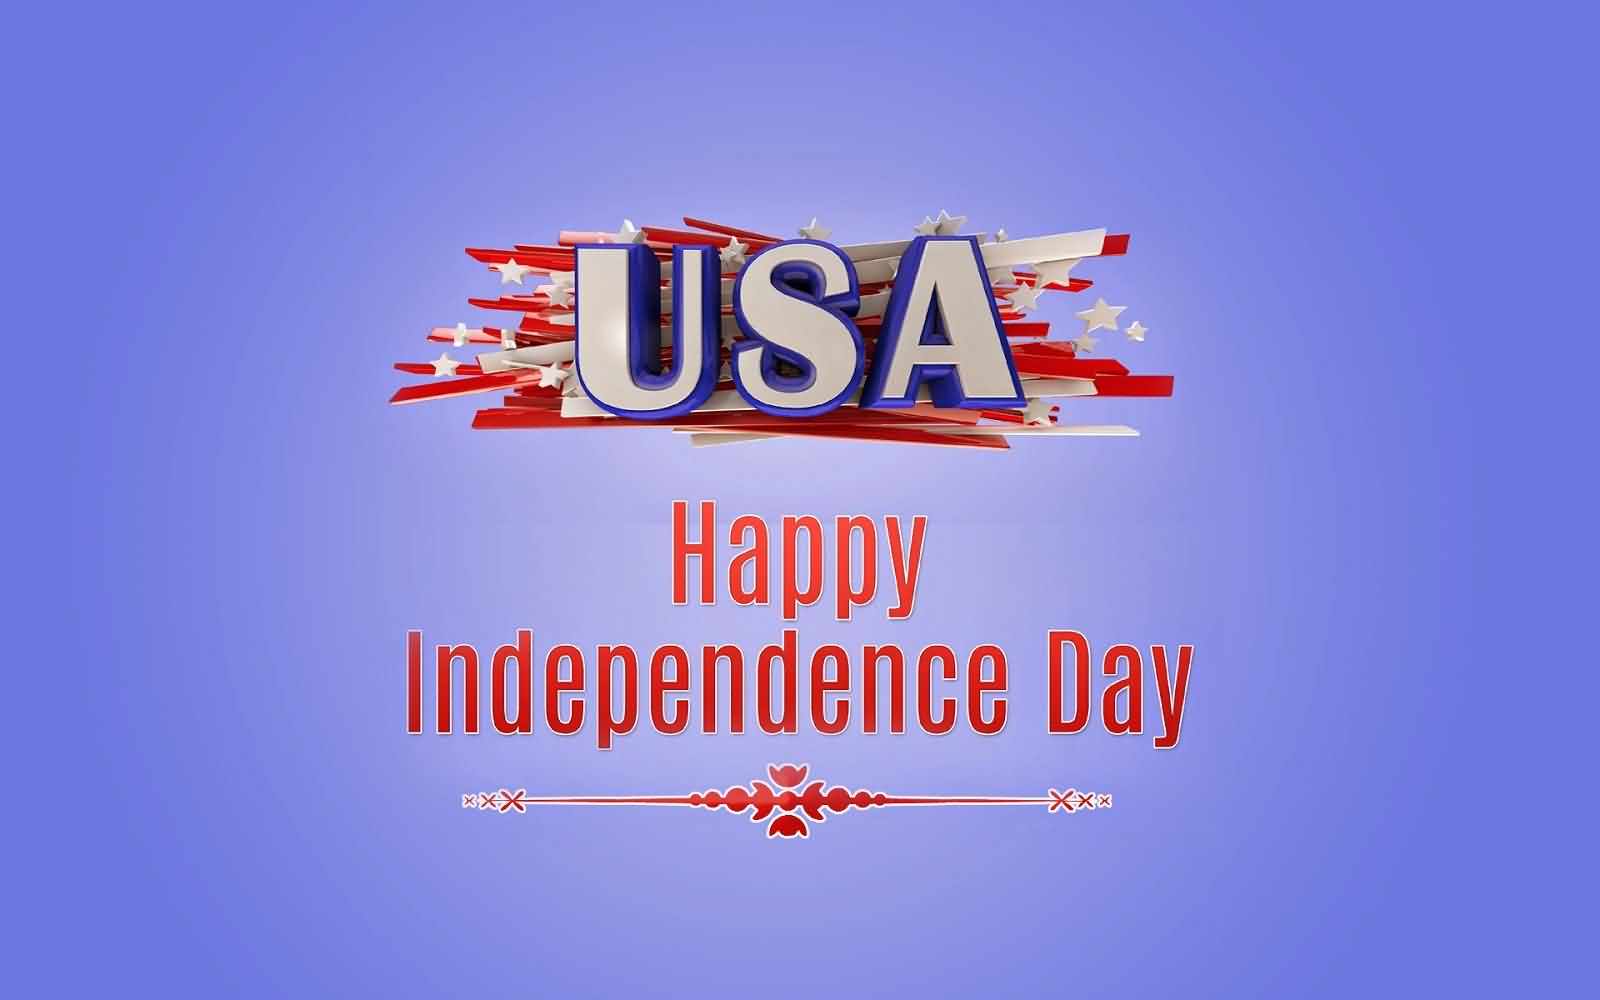 USA Happy Independence Day Greetings Picture